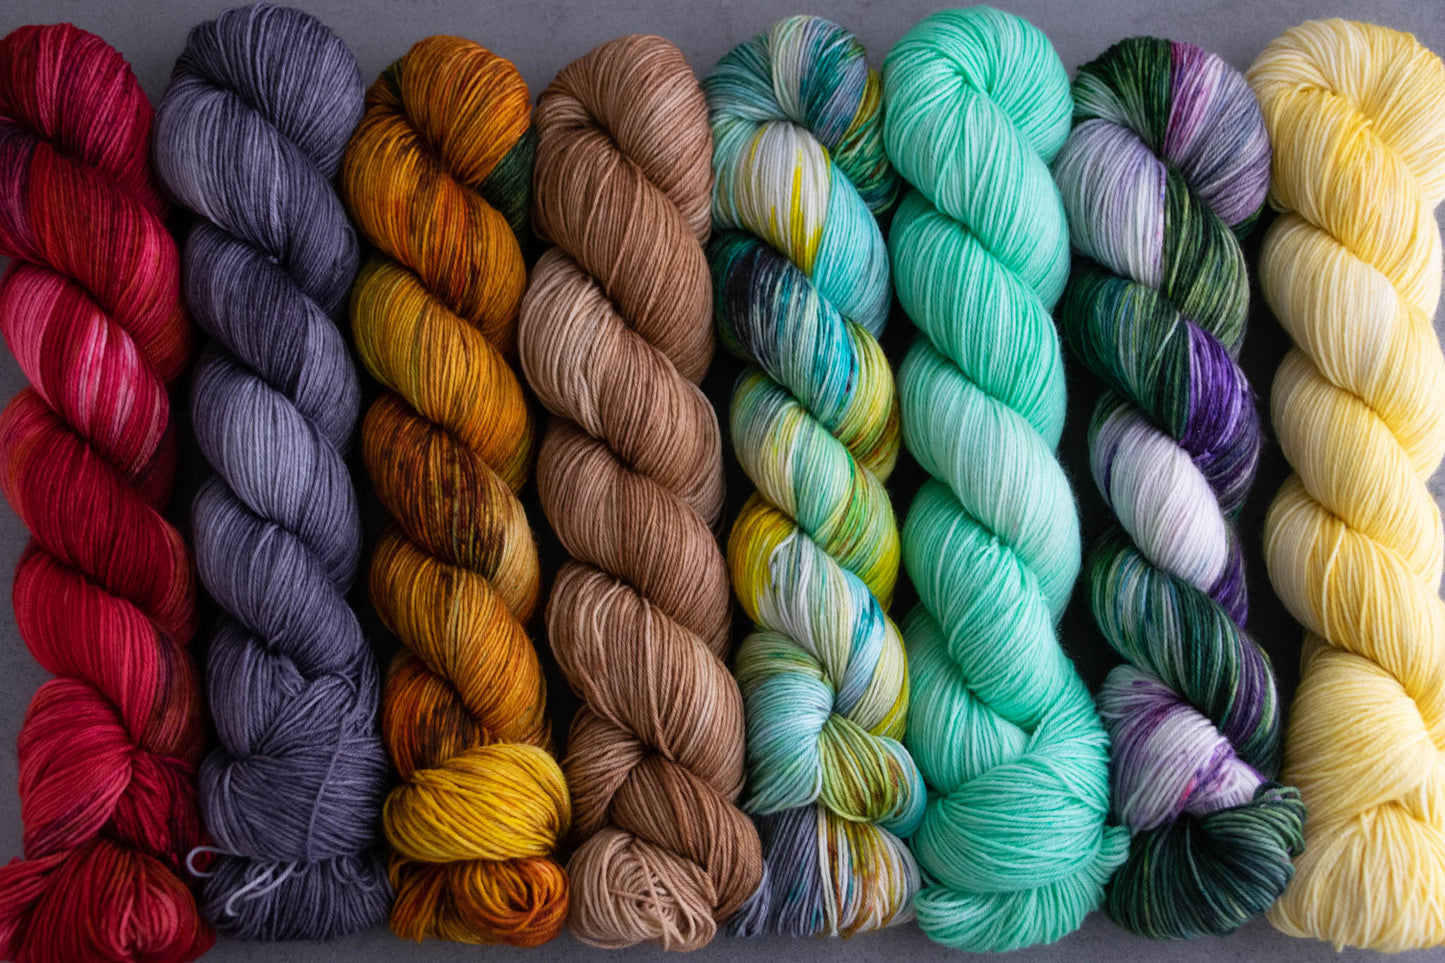 All eight skeins in the collection including red, brown, teal, yellow, purple, aqua, orange, and gray lined up together.